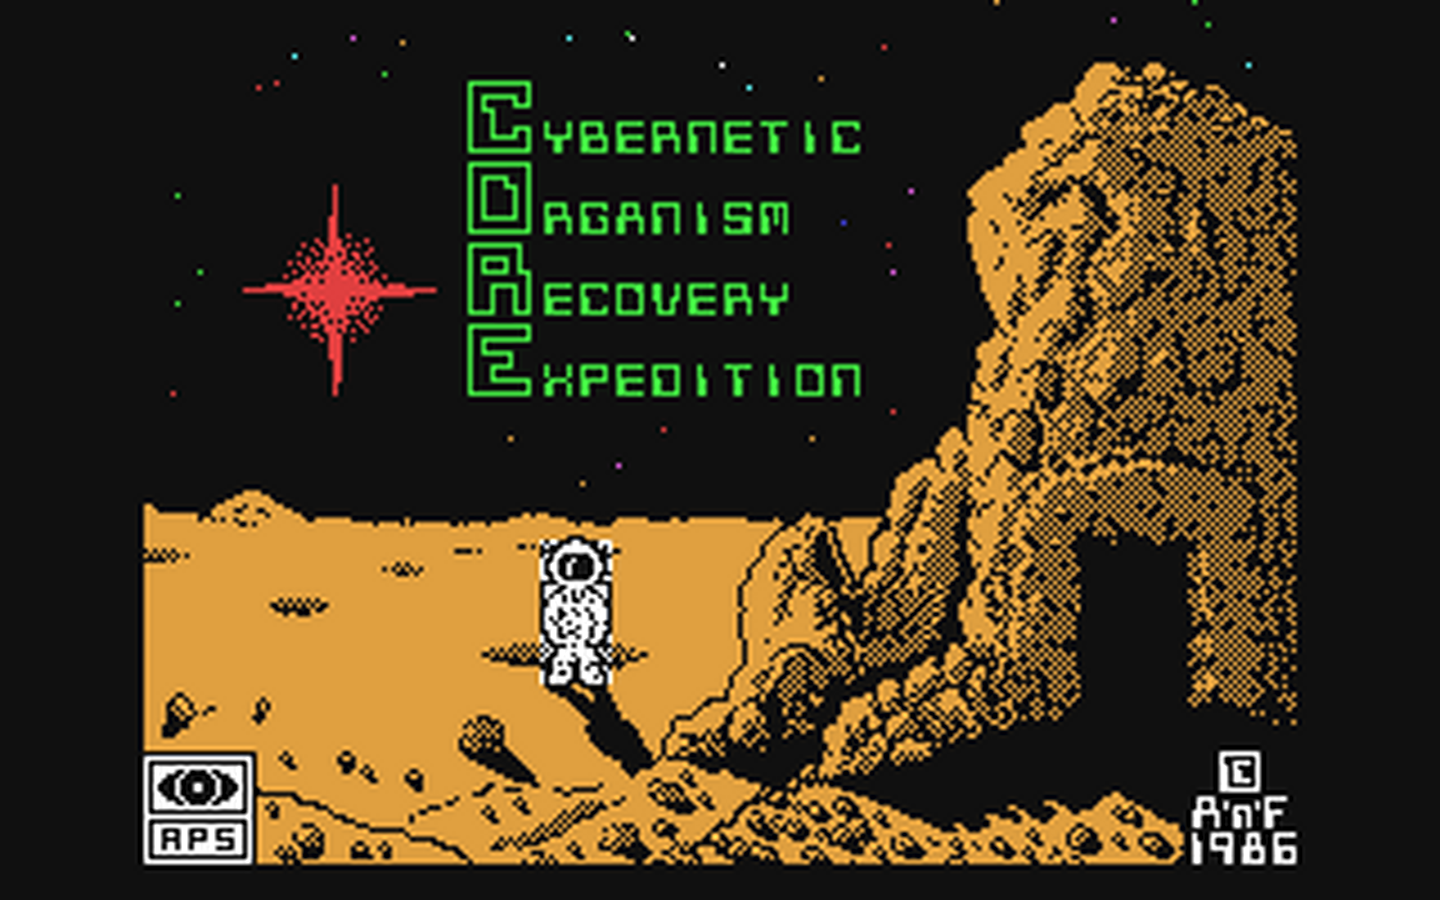 C64 GameBase CORE_-_Cybernatic_Organism_Recovery_Expedition A&F_Software_Ltd._(A'n'F) 1986